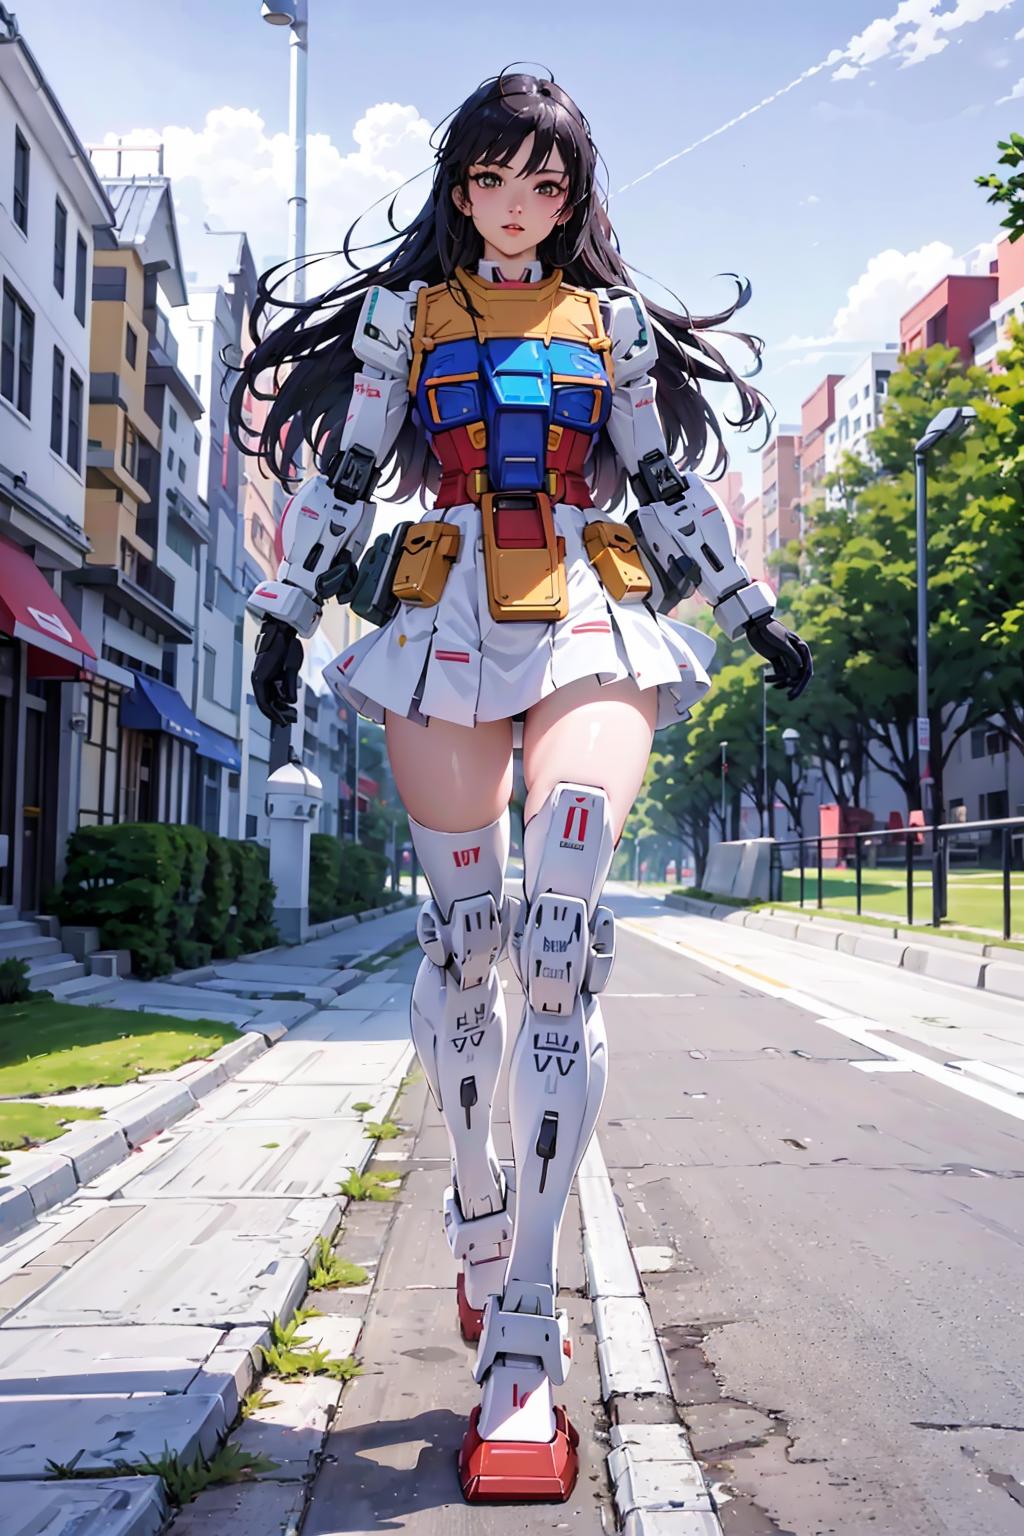 Gundam RX78-2 outfit style 高达RX78-2外观风格 image by ttplanet